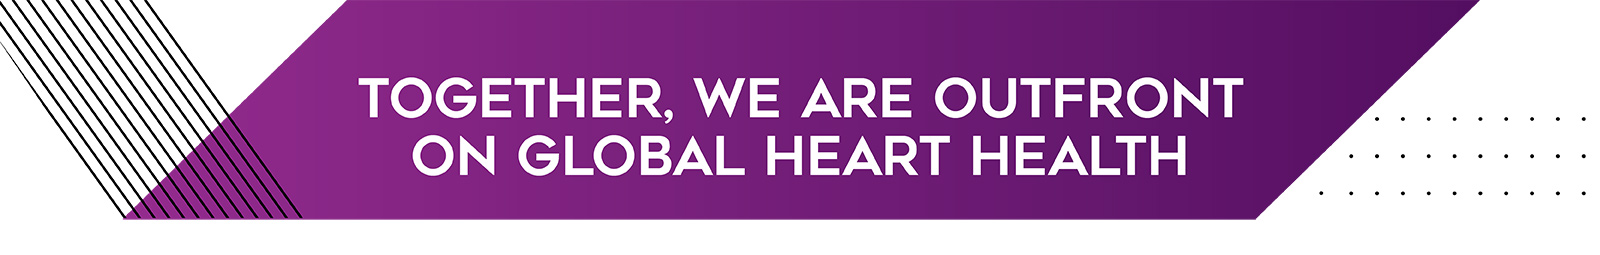 TOGETHER, WE ARE OUTFRONT ON GLOBAL HEART HEALTH